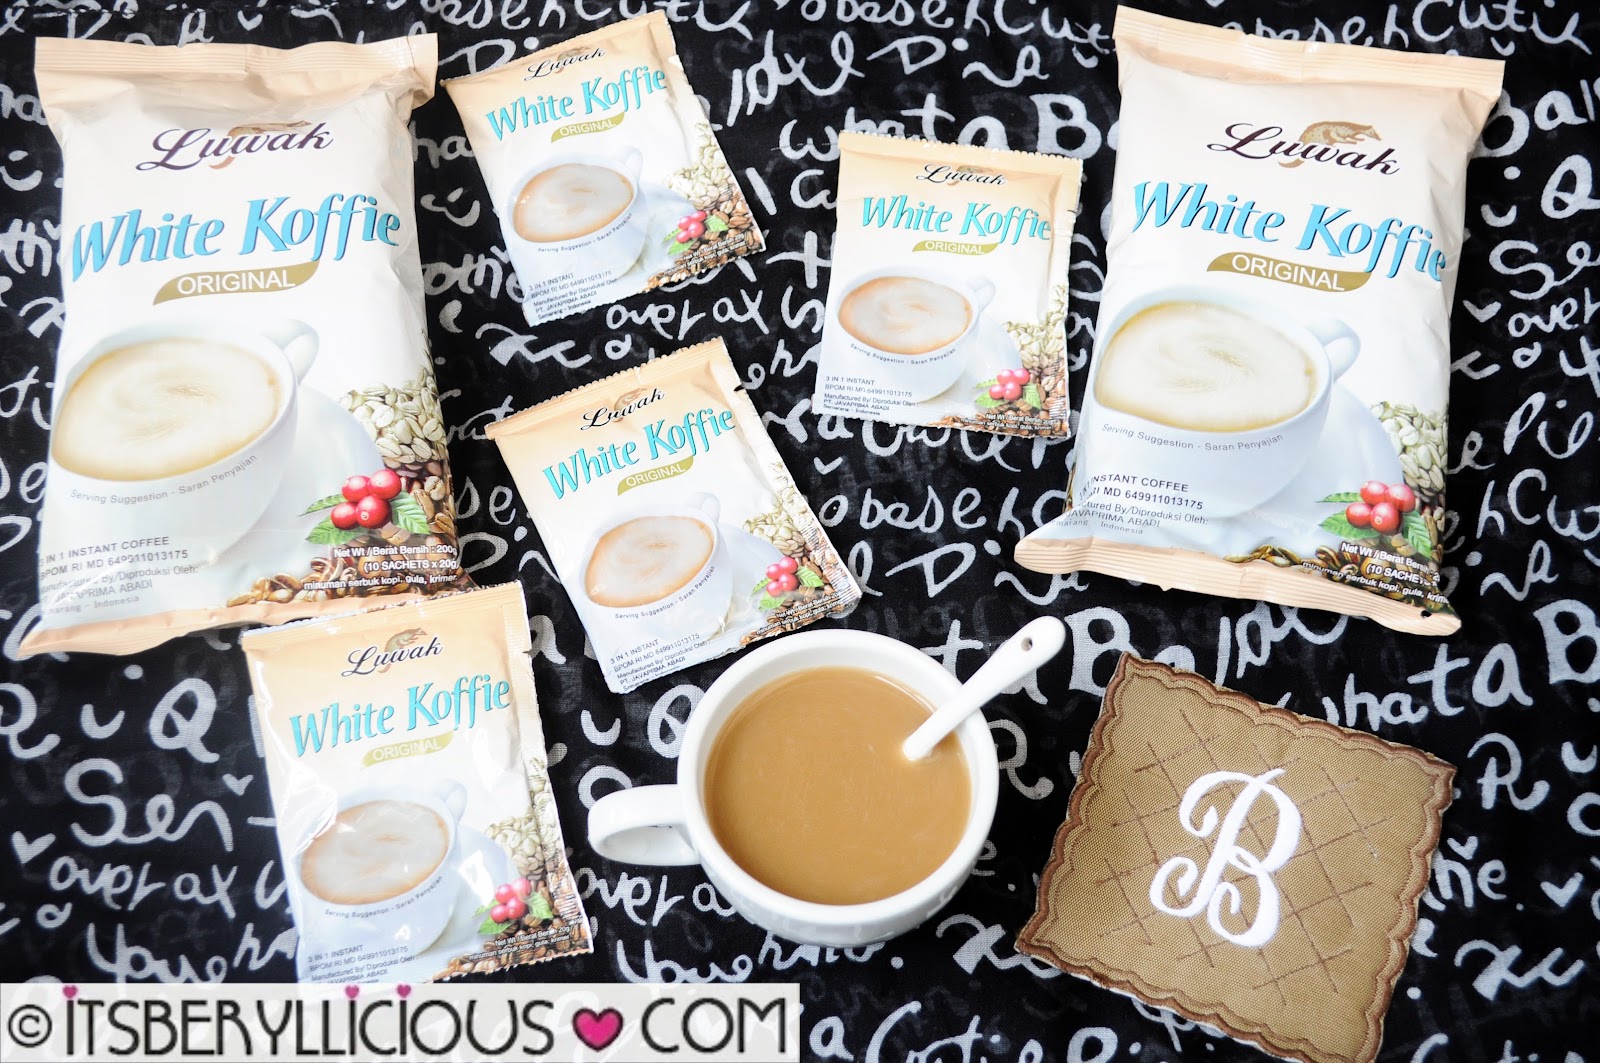 Luwak White Koffie- The Rise of the White Coffee Revolution from